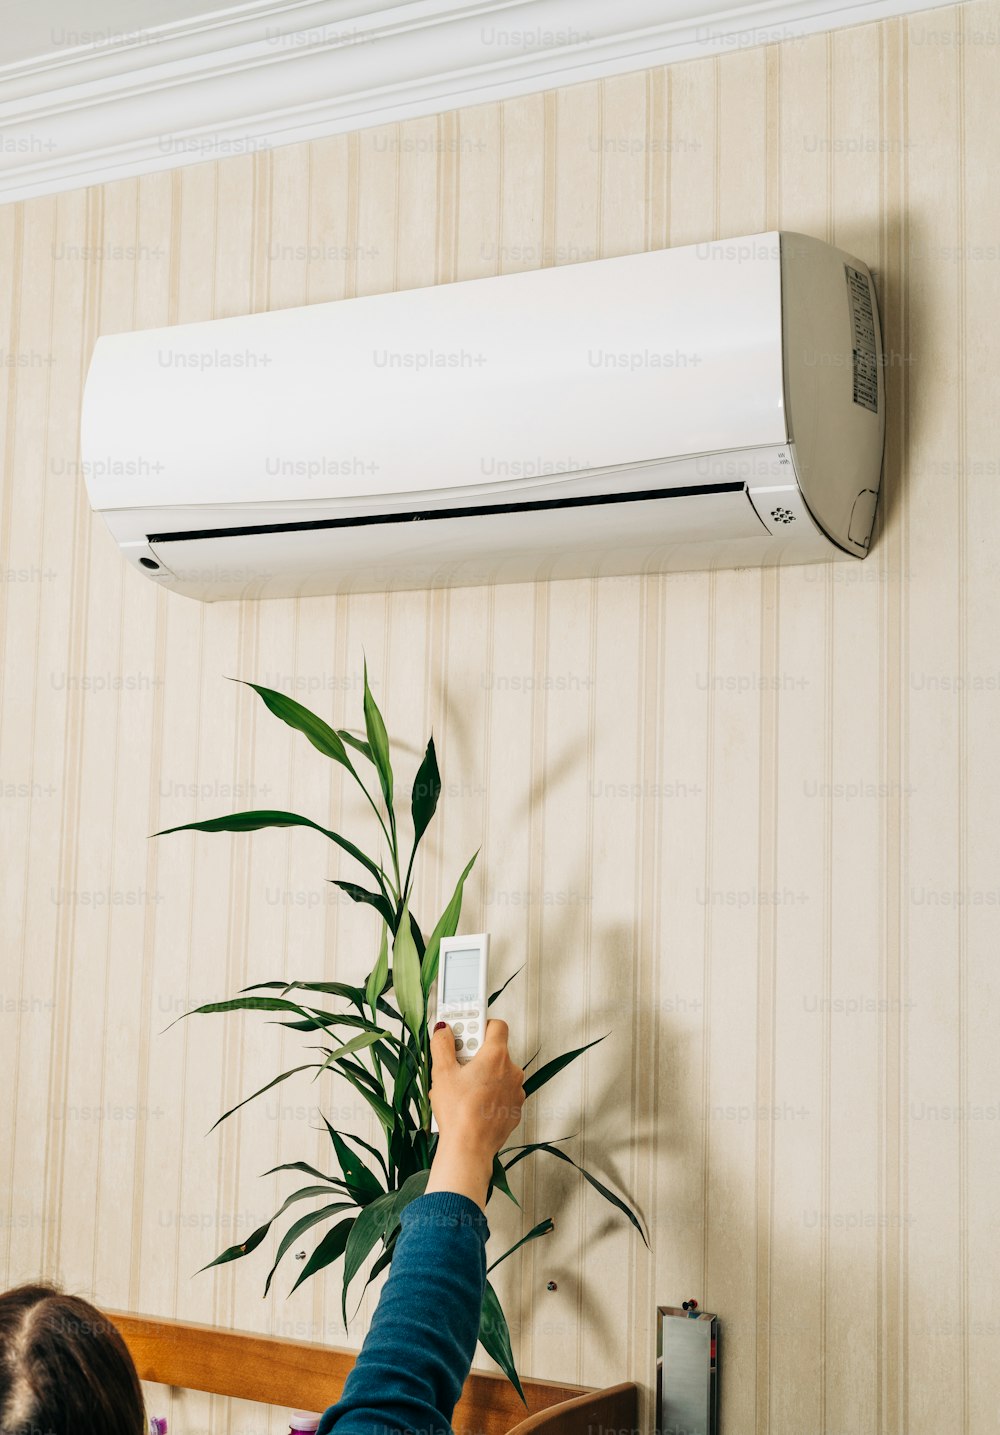 a person holding a remote control in front of a wall mounted air conditioner